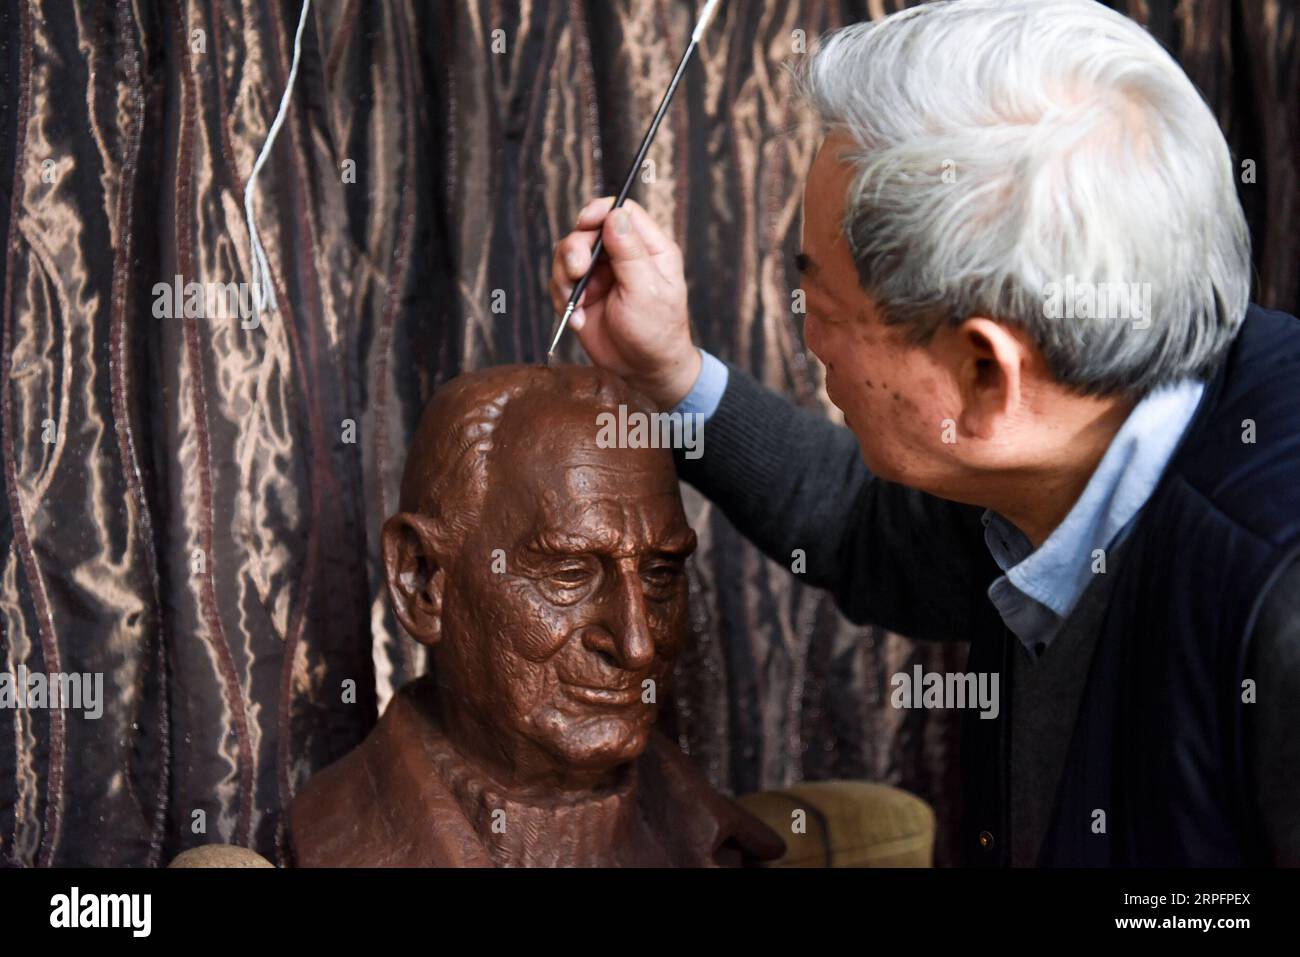 190929 -- WELLINGTON, Sept. 29, 2019 -- Deng Bangzhen, a painter and one of Rewi Alley s adopted sons, colors a statue featuring Rewi Alley in Auckland, New Zealand, Aug. 30, 2019. People from both New Zealand and China still very often talk about Rewi Alley, a New Zealand-born writer, social reformer and educator, even 32 years after his death in Beijing. An old friend of the Chinese people, Rewi Alley spent 60 years living and working in China. He made important contributions to the Chinese people s fight against the fascist invasion, the economic development of the new China, and the friend Stock Photo